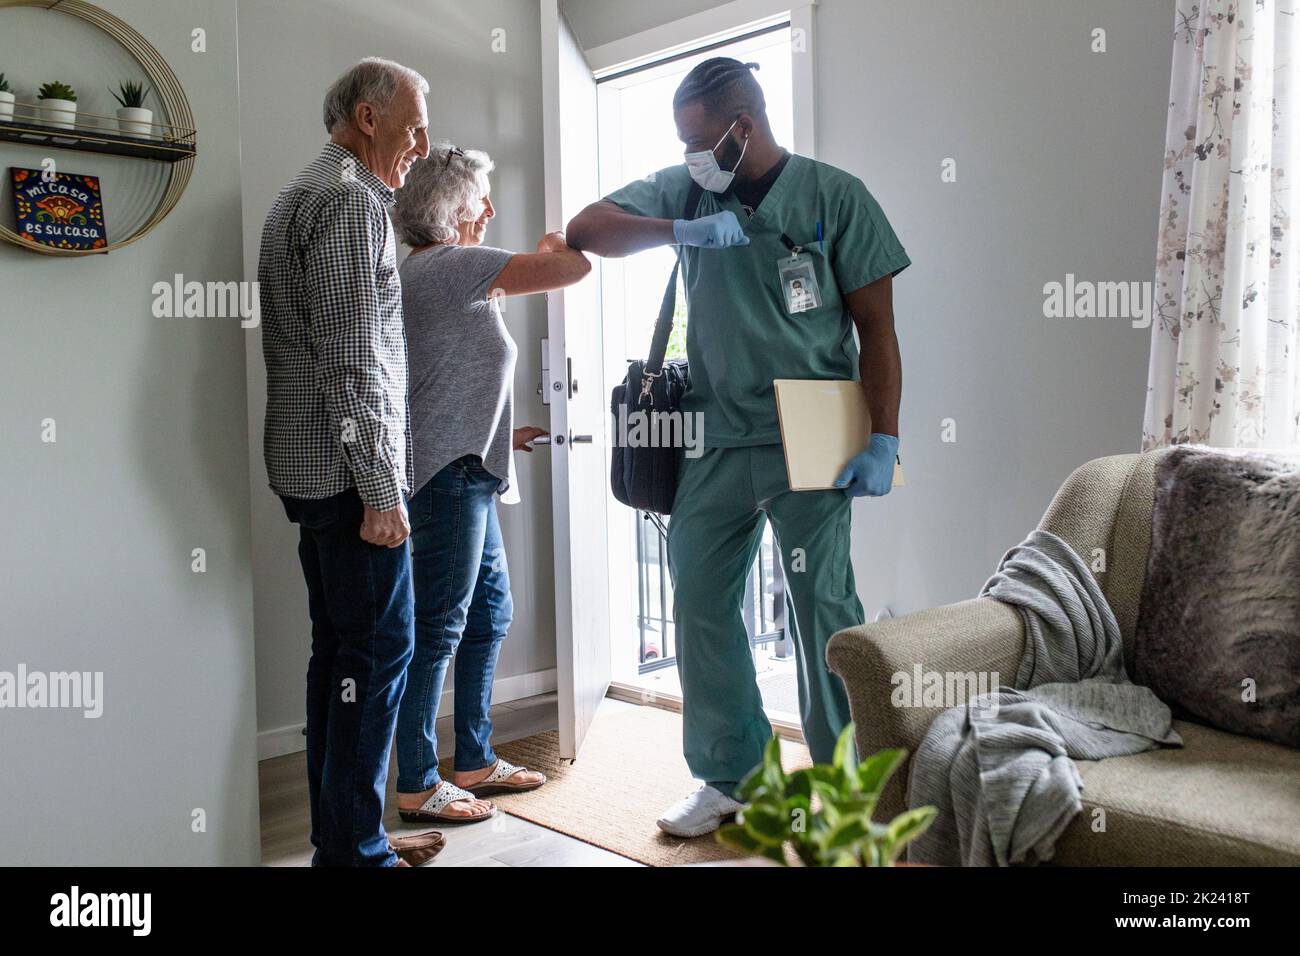 Home caregiver greeting senior couple with elbow bump at front door Stock Photo